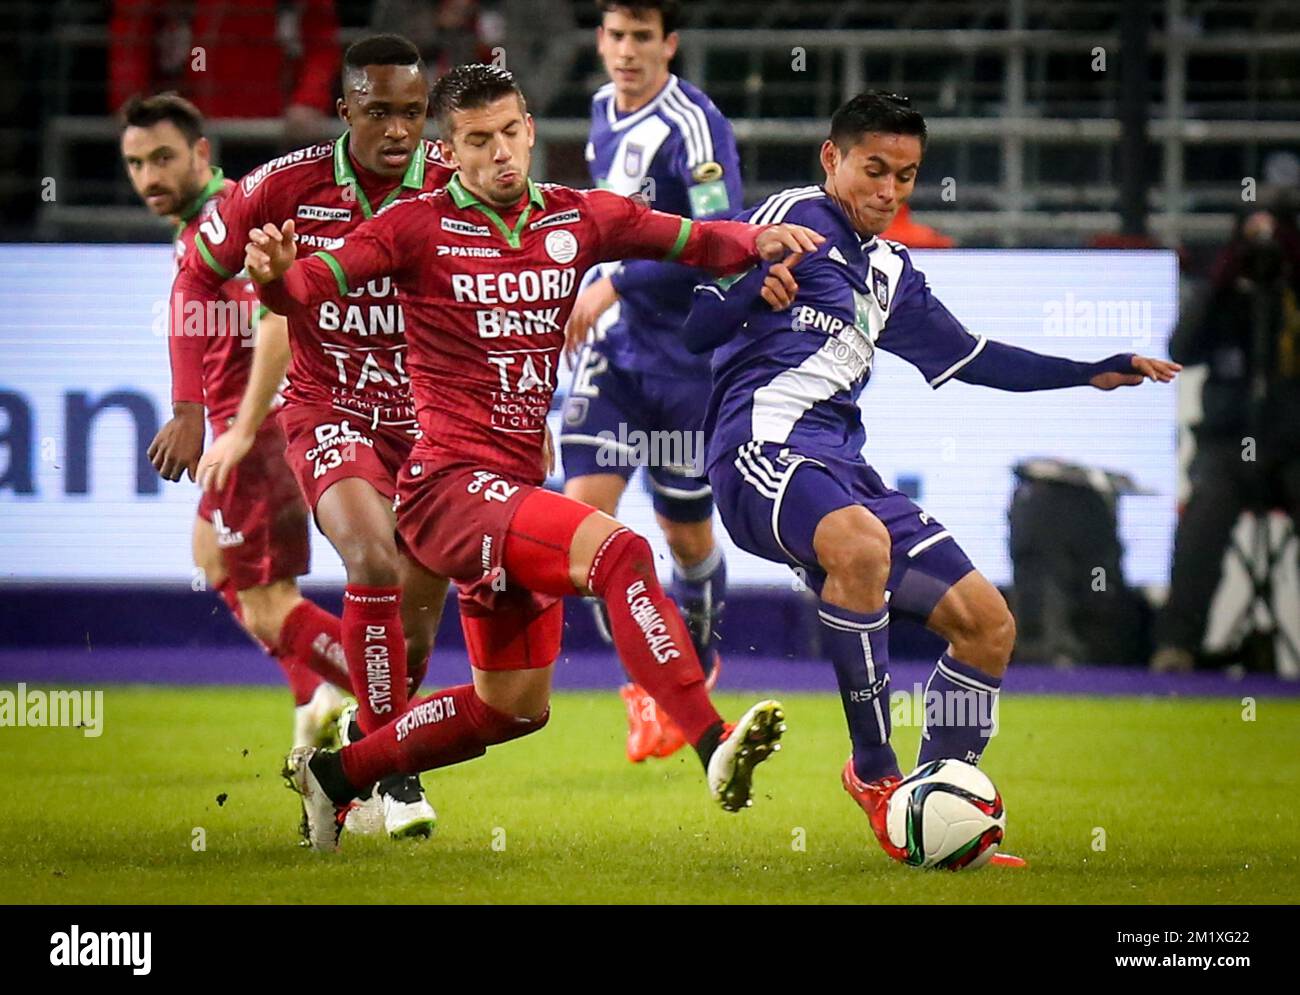 20150201 - BRUSSELS, BELGIUM: Essevee's Aleksander Trajskovski and Anderlecht's Andy Najar fight for the ball during the Jupiler Pro League match between RSC Anderlecht and SV Zulte Waregem, in Brussels, Sunday 01 February 2015, on day 24 of the Belgian soccer championship. BELGA PHOTO VIRGINIE LEFOUR Stock Photo